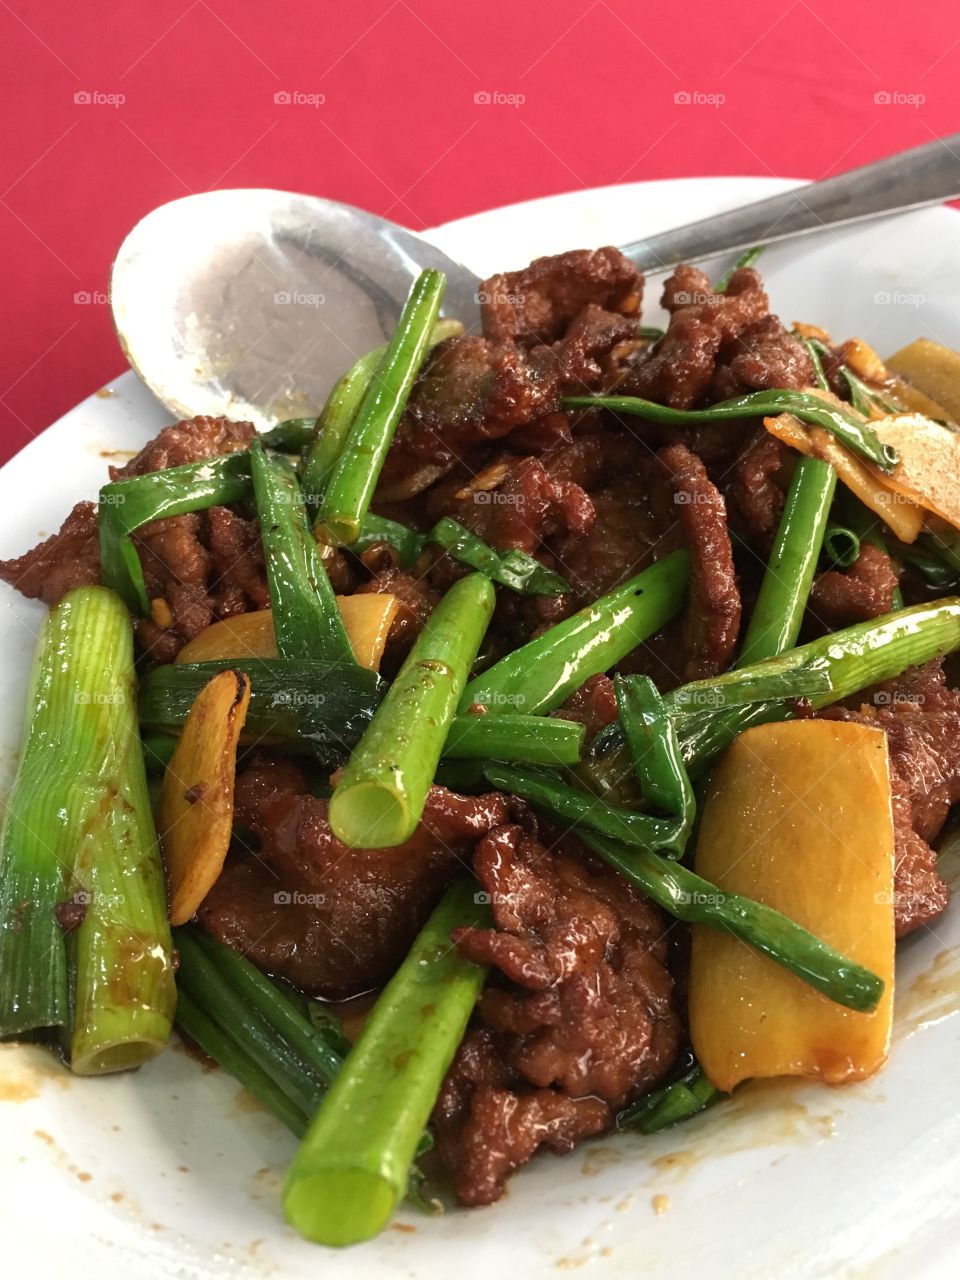 Stir Fried Venison With Ginger and Spring Onions 